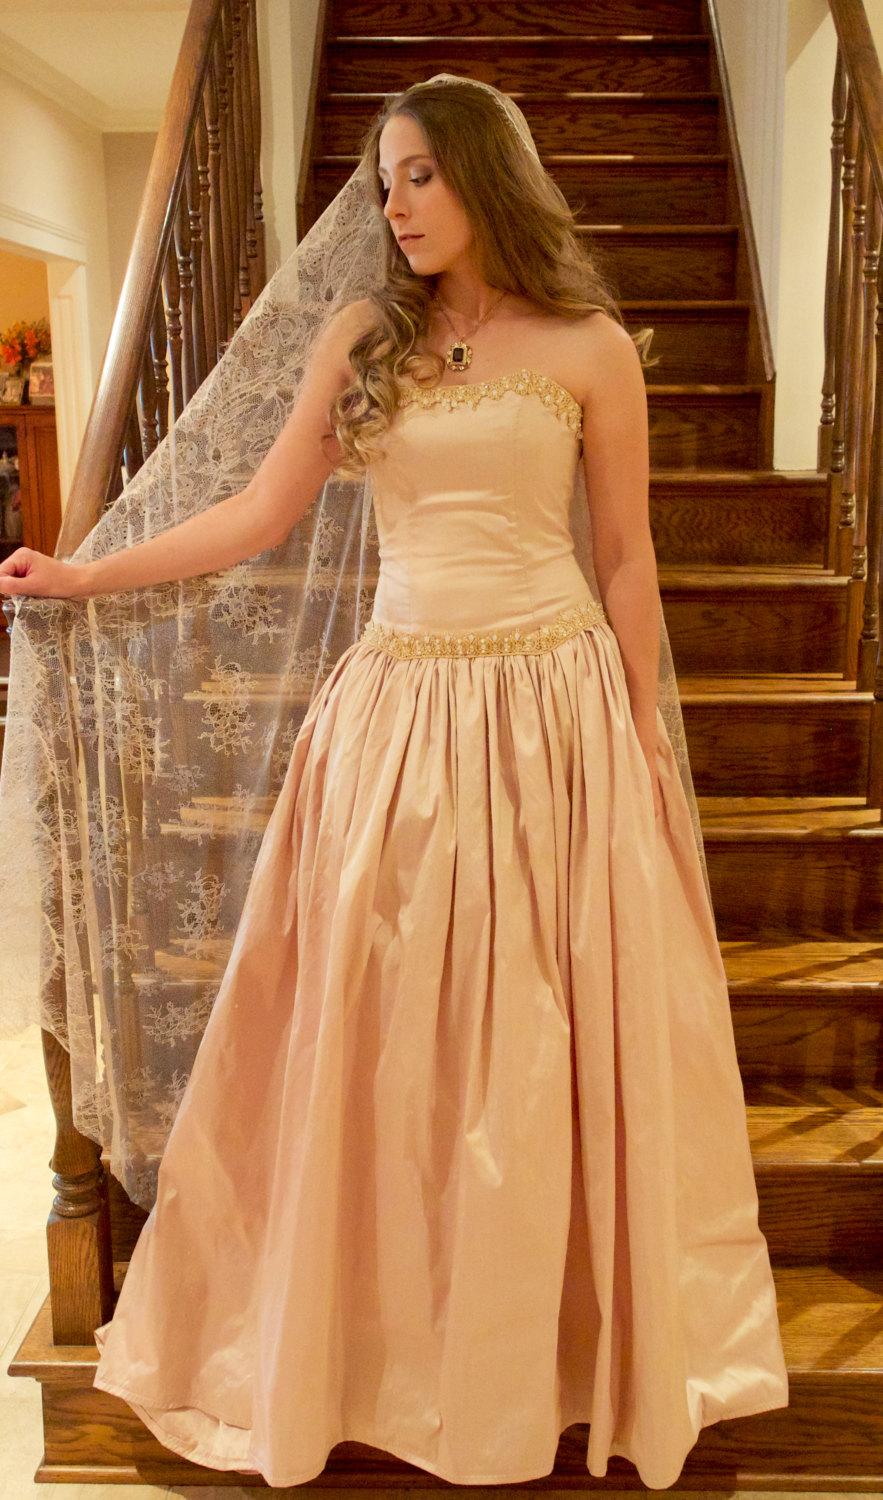 Wedding - Rose Gold Silk Ballgown Wedding Dress, Gold Lace & Crystal Buttons, Affordable and Comfortable Wedding Dress, Vintage inspired (US SIZE 6/8)